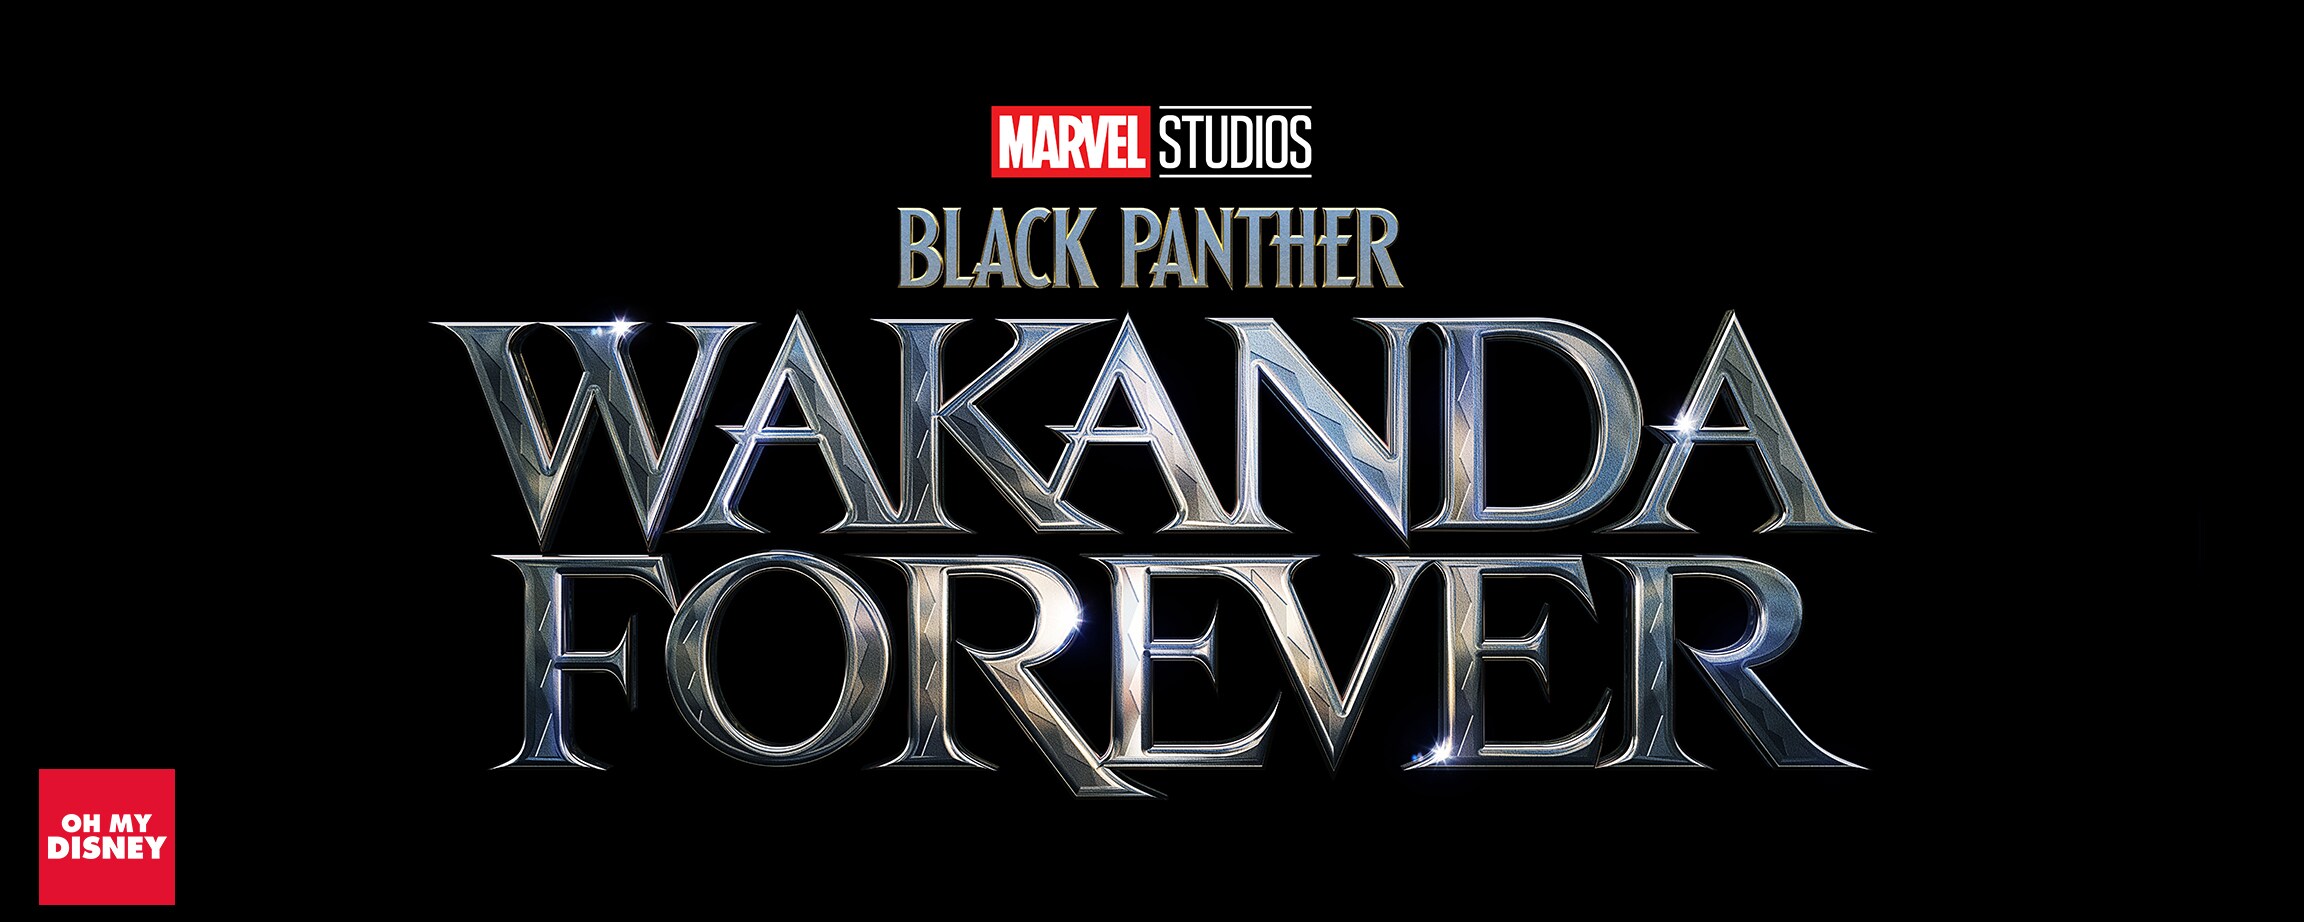 Quiz: Get 100% To Prove That You’re The Ultimate Black Panther: Wakanda Forever Expert?